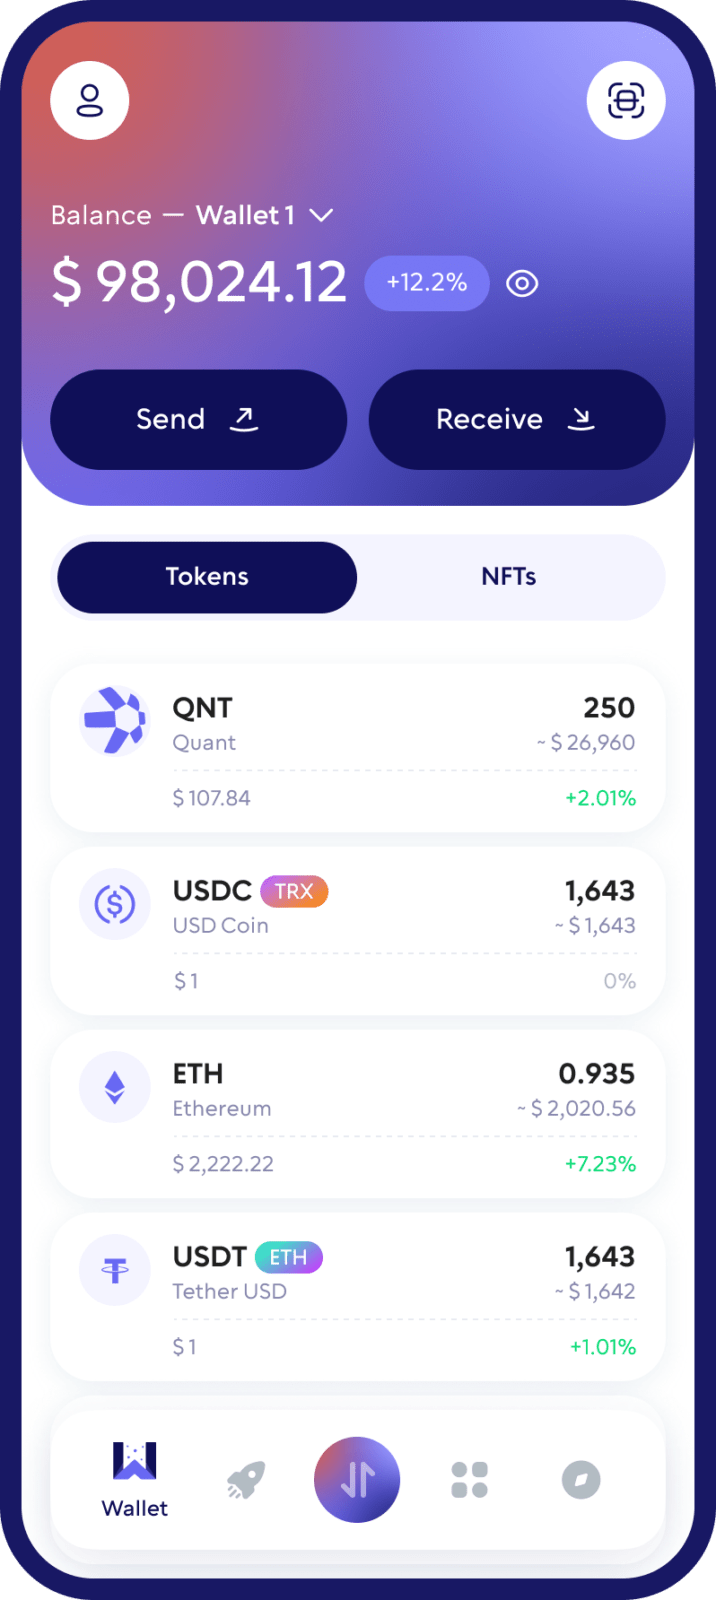 Quant (QNT) Cryptocurrency Wallet Walletverse